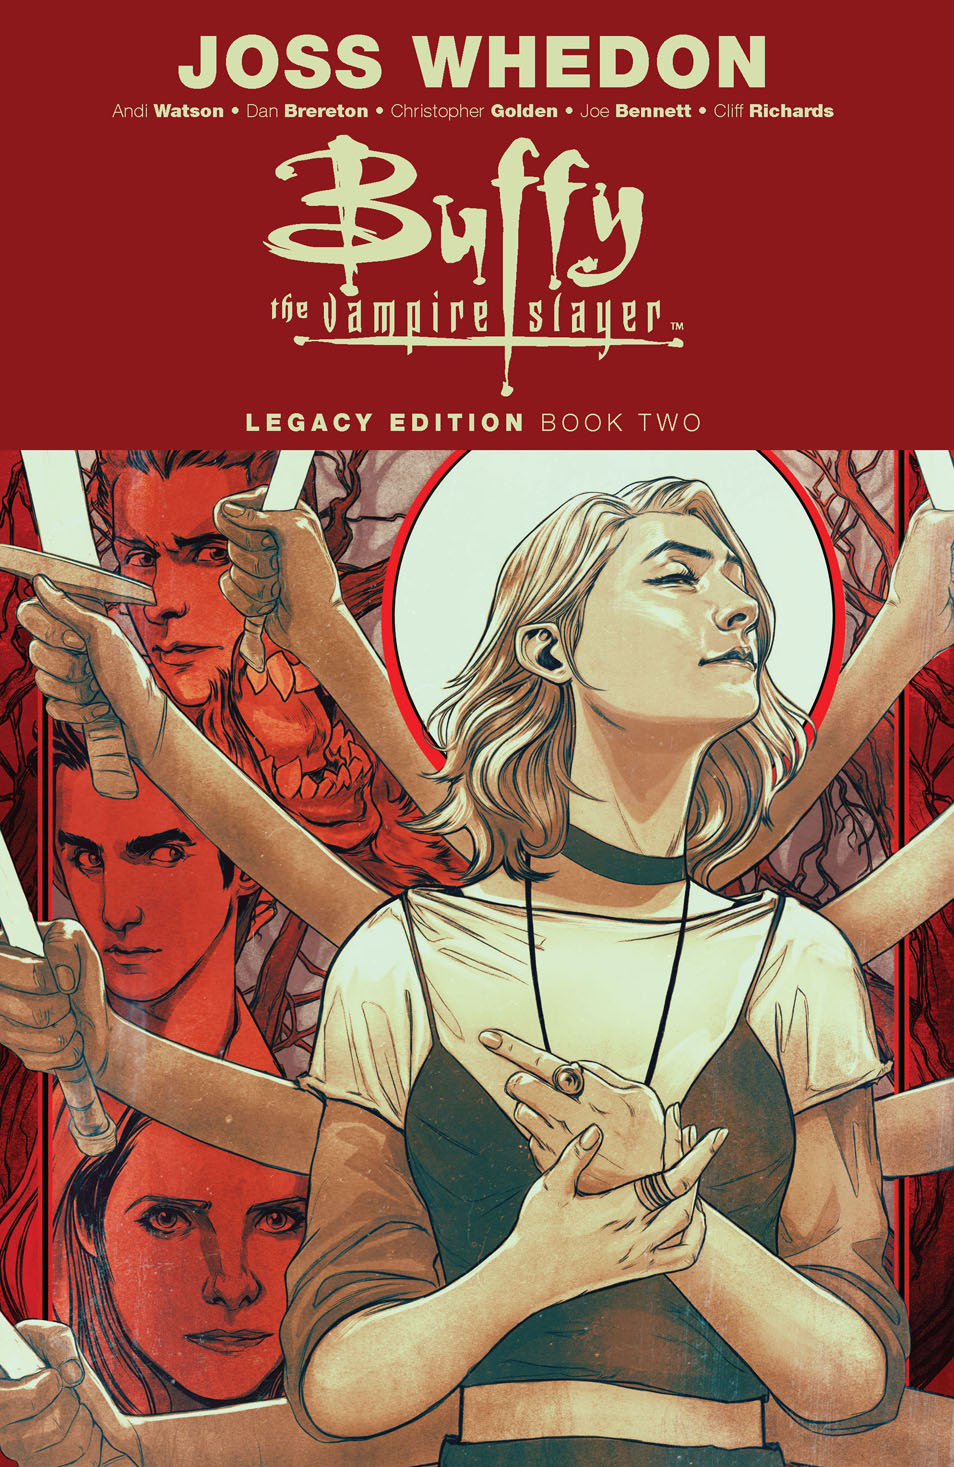 This image is the cover for the book Buffy the Vampire Slayer Legacy Edition Book 2, Buffy the Vampire Slayer